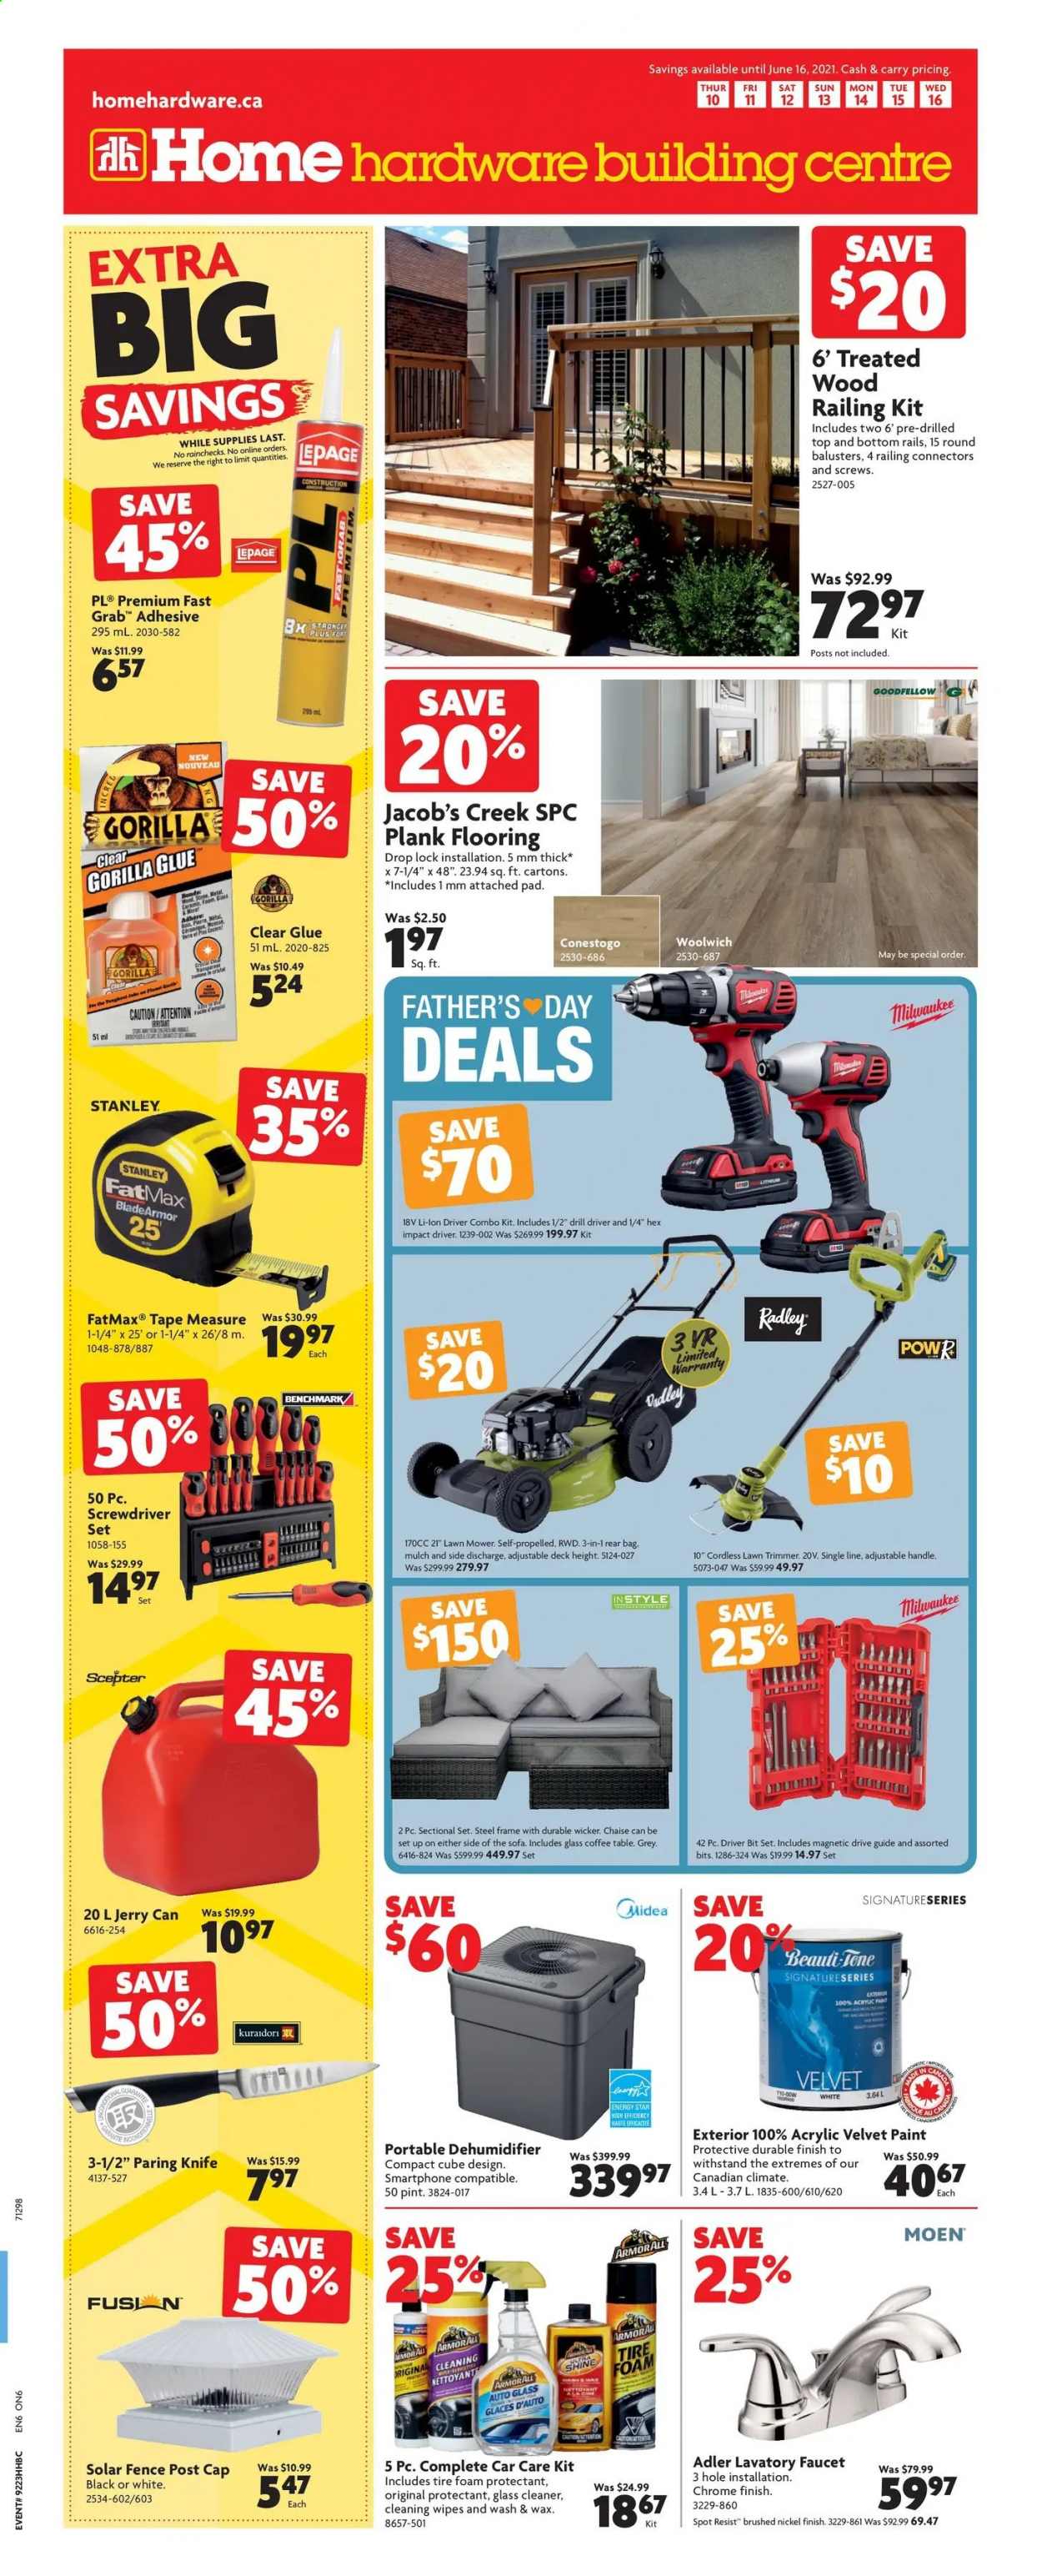 thumbnail - Home Hardware Building Centre Flyer - June 10, 2021 - June 16, 2021 - Sales products - cleansing wipes, wipes, cleaner, glass cleaner, bag, trimmer, table, 2-piece sectional, sofa, coffee table, faucet, glue, adhesive, paint, Stanley, flooring, Milwaukee, drill, screwdriver, impact driver, lawn mower, combo kit, screwdriver set, measuring tape, garden mulch, knife. Page 1.